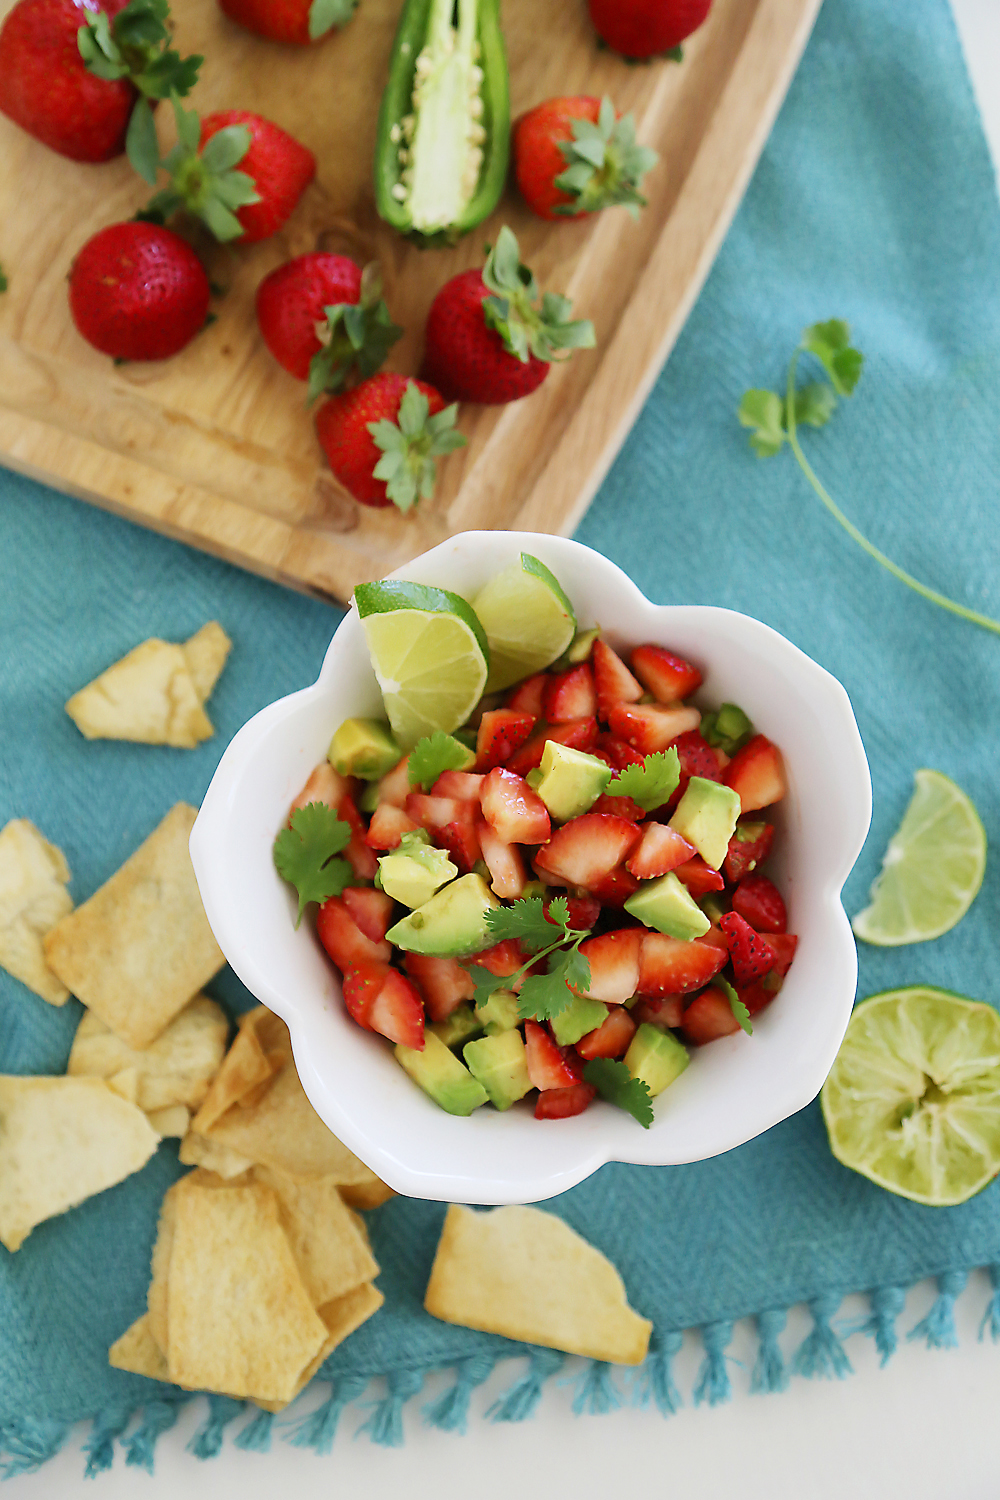 Strawberry Jalapeño Avocado Salsa - The perfect summer salsa! Serve with tortilla chips for snacking, or on the side of grilled meats, steak and fish. thecomfortofcooking.com